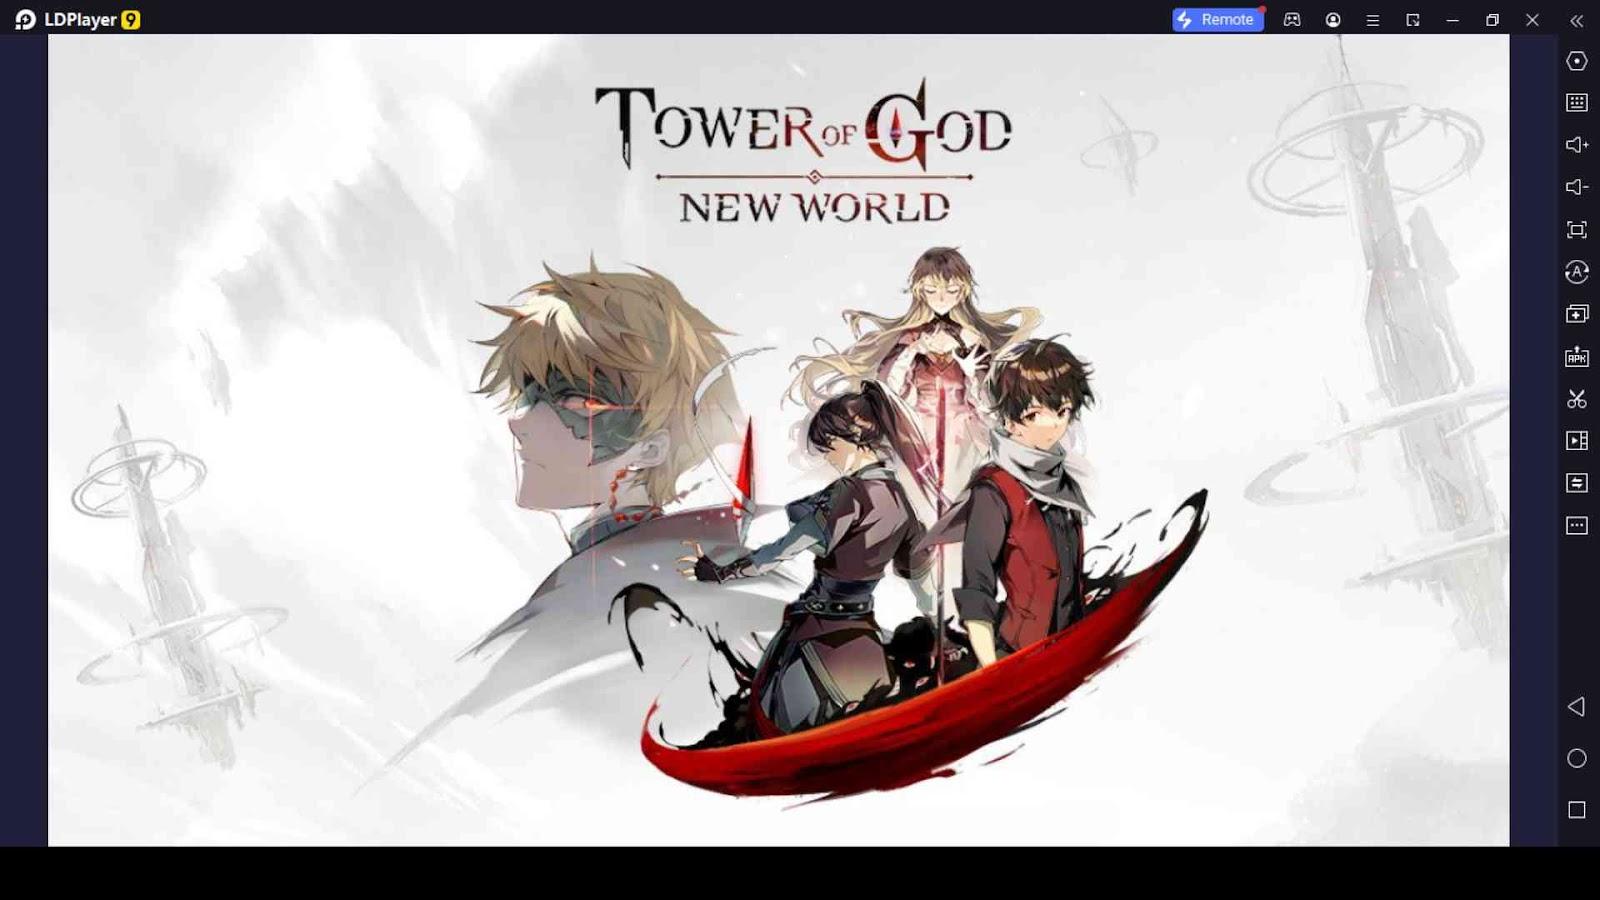 Tower of God : New World First Impressions - A Promising Climb Up the Tower  - GamerBraves